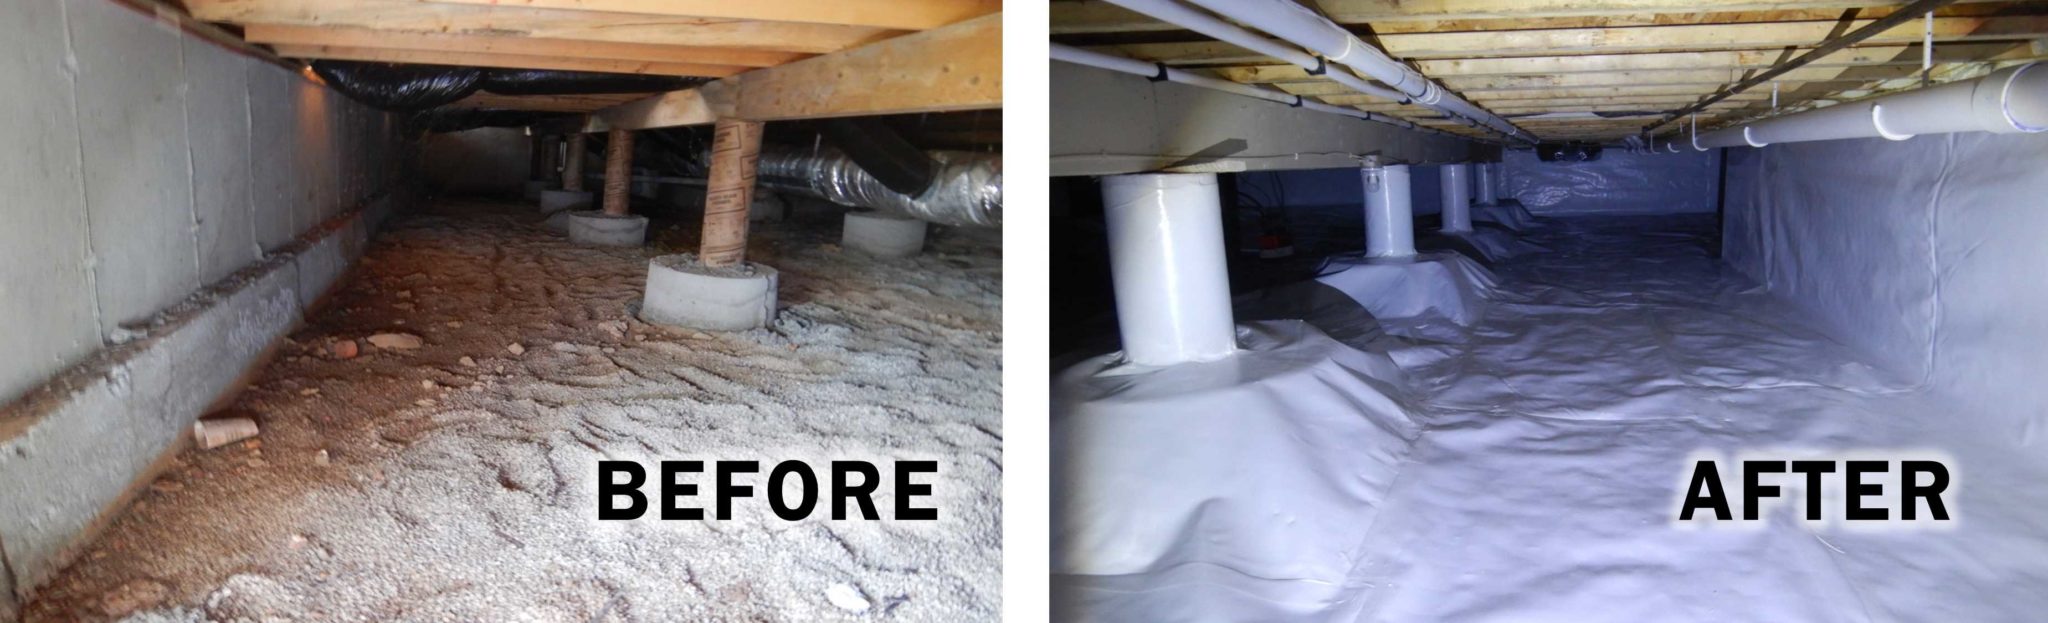 Crawl Space Encapsulation before and after